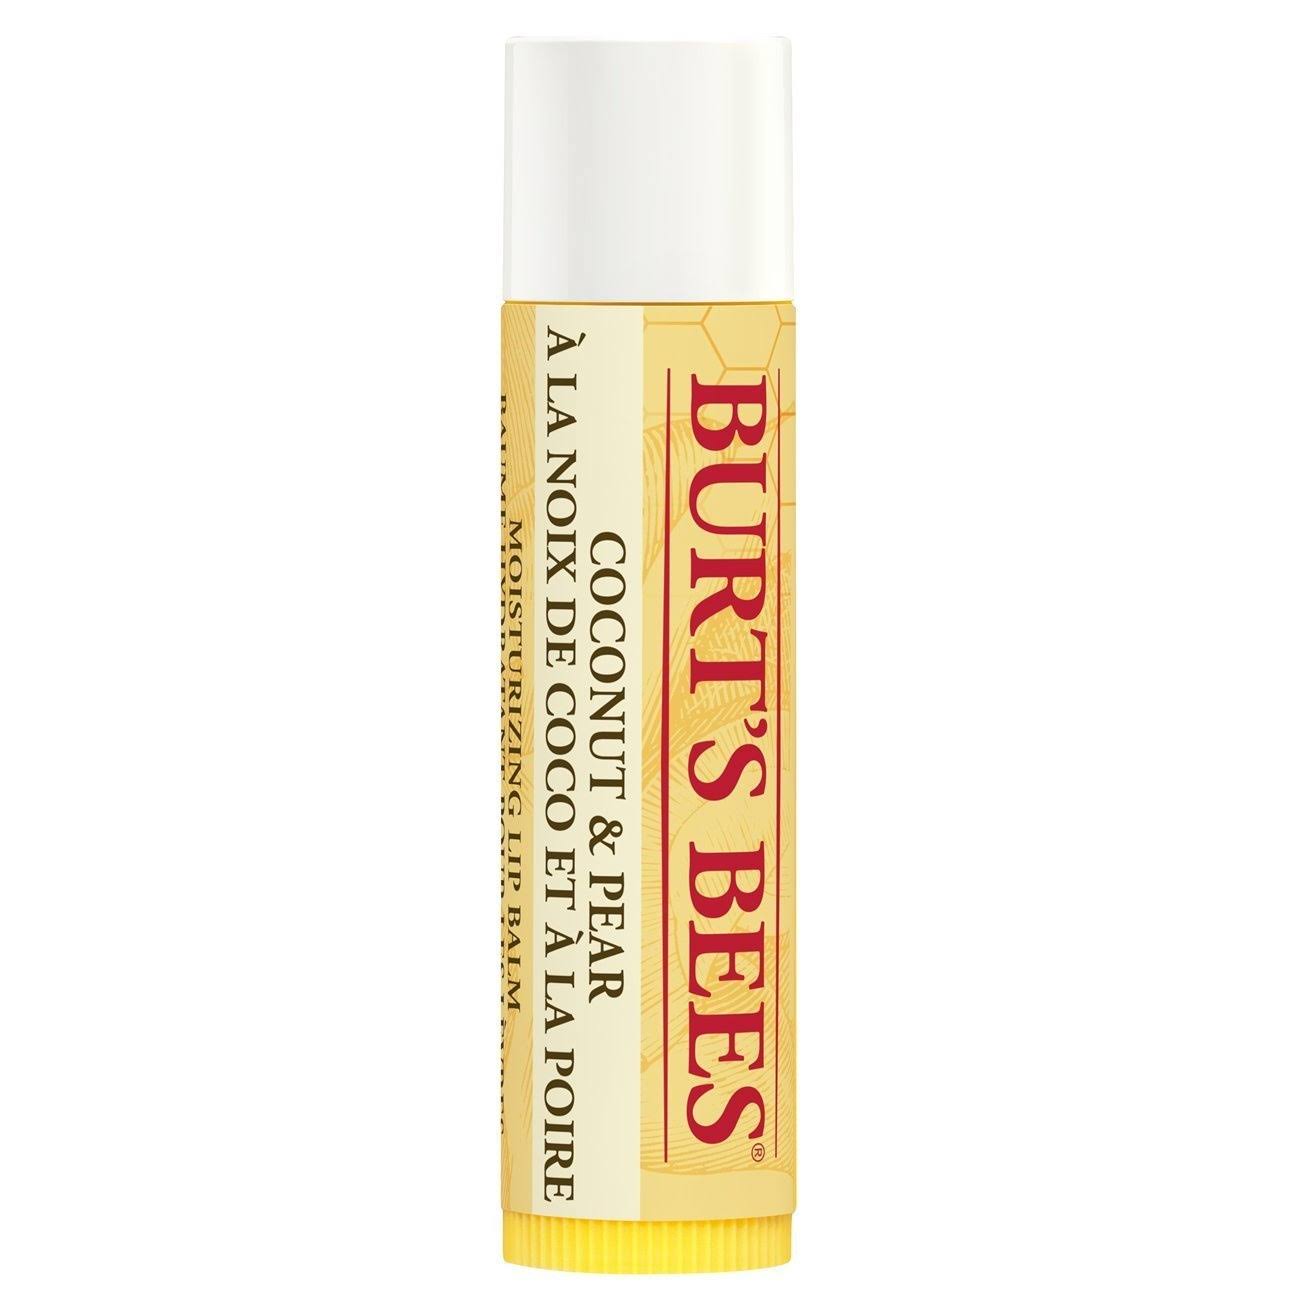 Burt's Bees Hydrating Lip Balm With Coconut & Pear